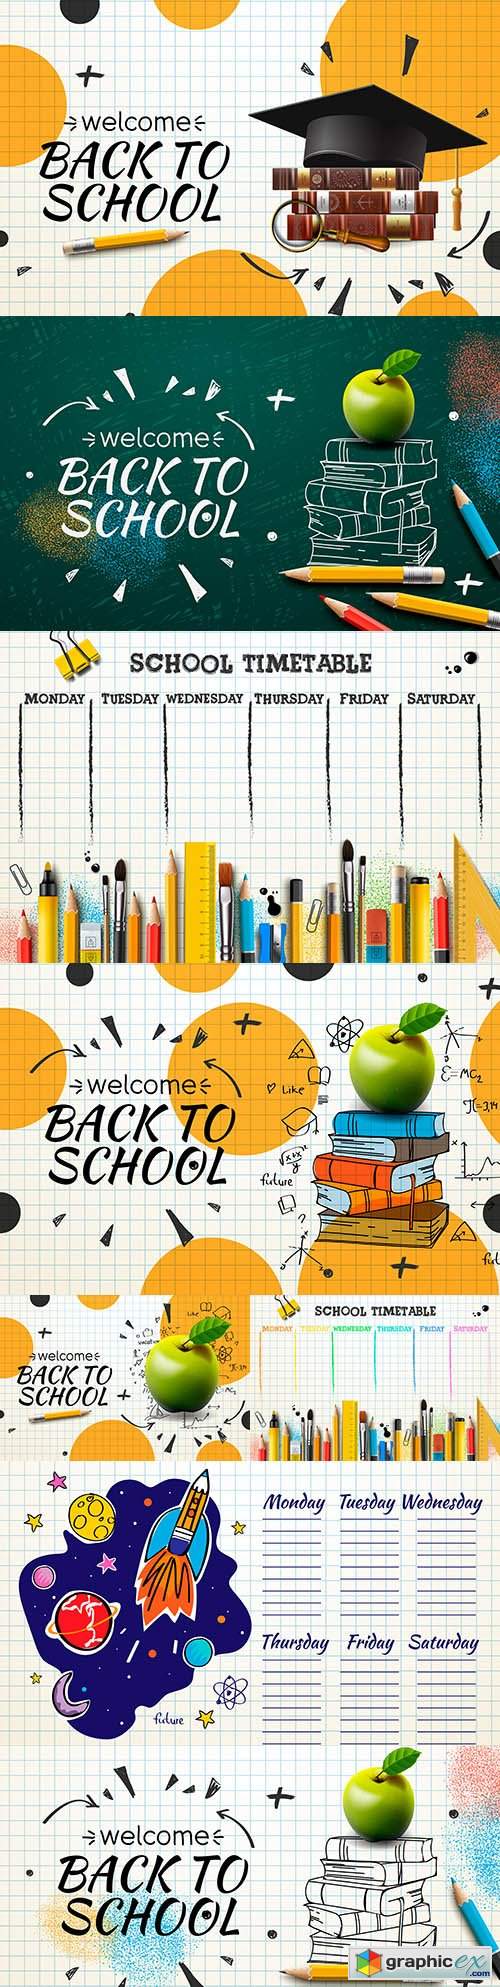  Back to school and accessories collection illustration 38 